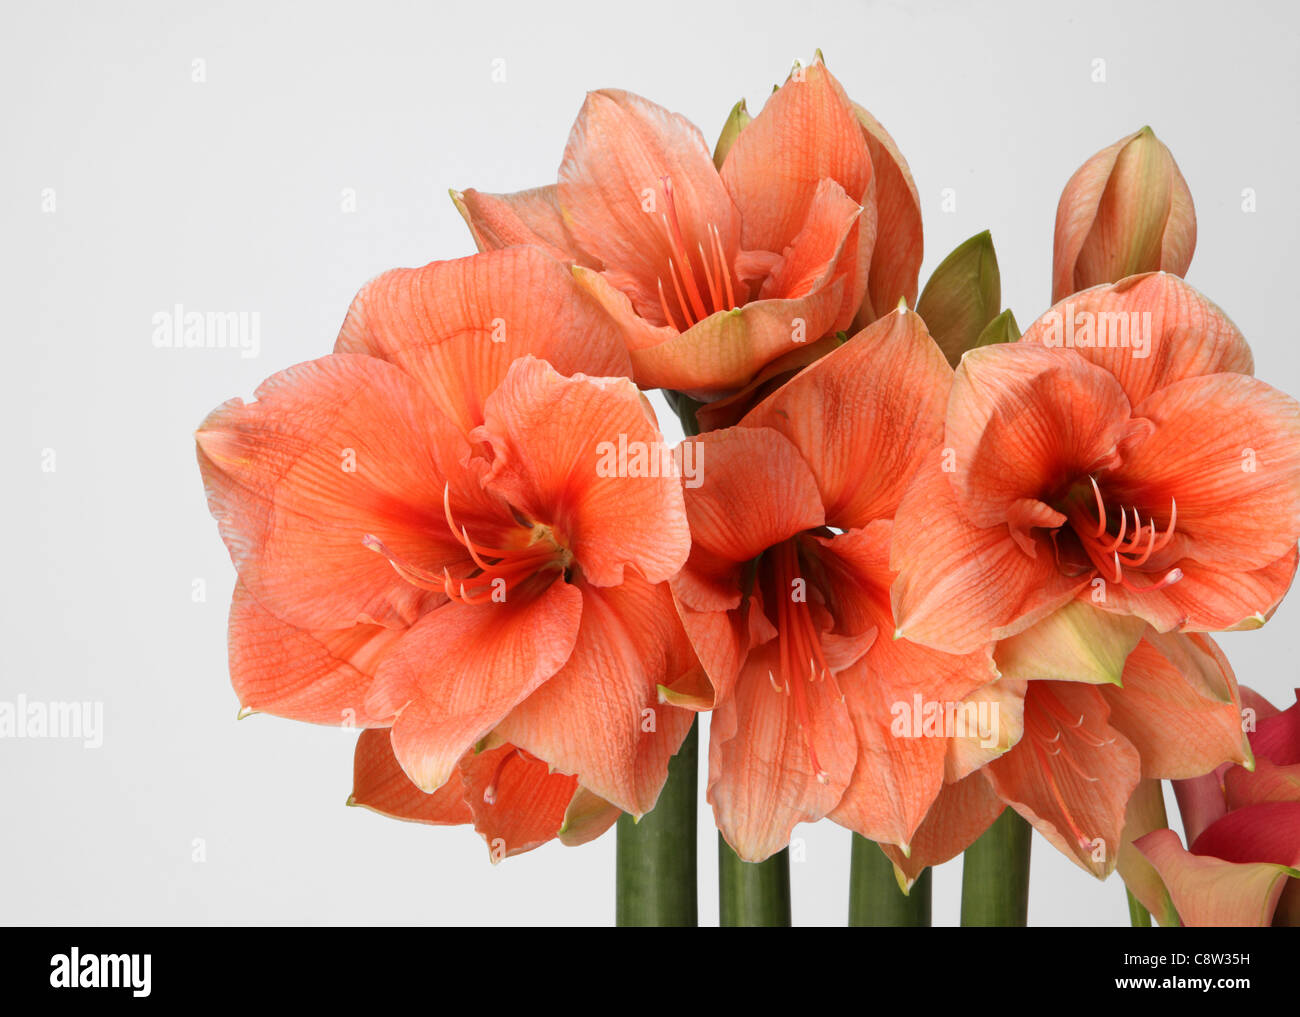 A close-up of a colorful bouquet of flowers. Salmon amarylis lilies Stock Photo